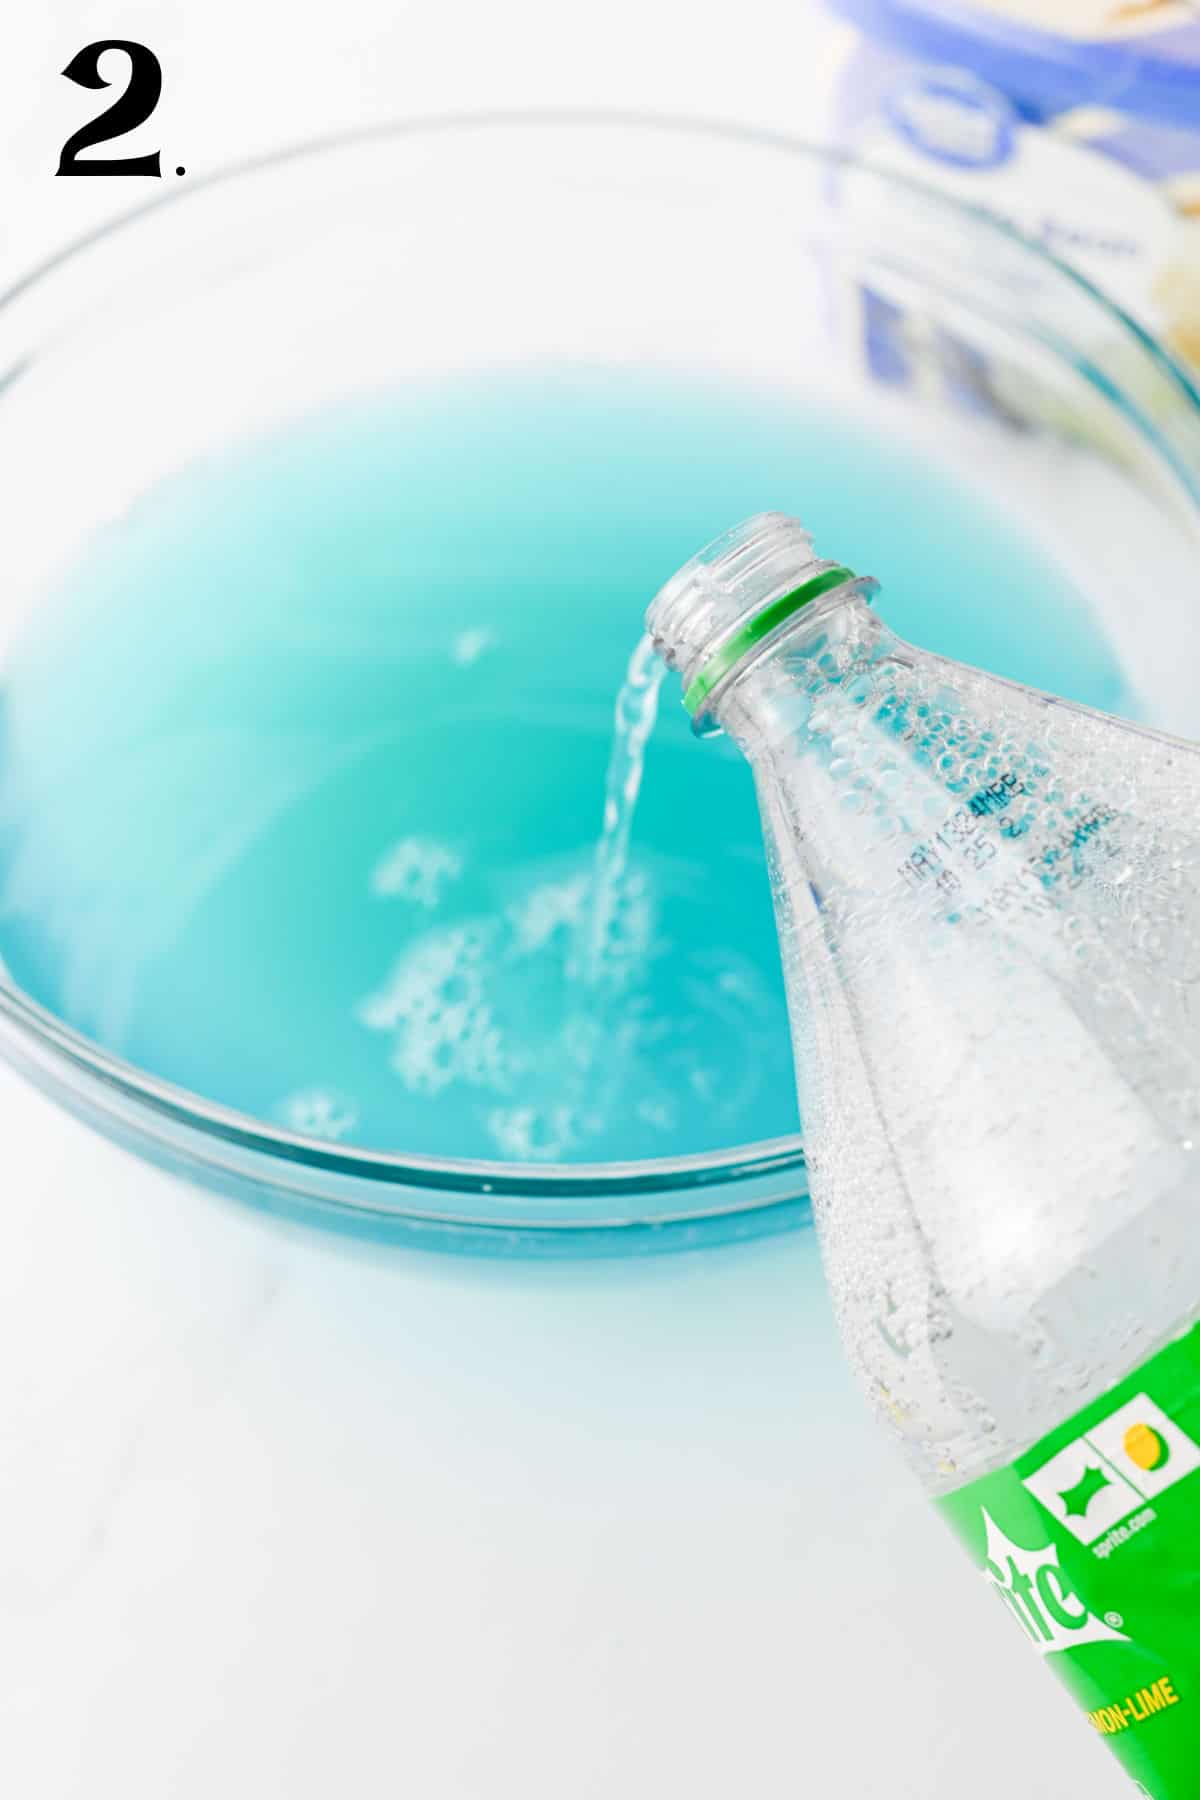 How to Make Blue Punch Step 2 - adding soda.